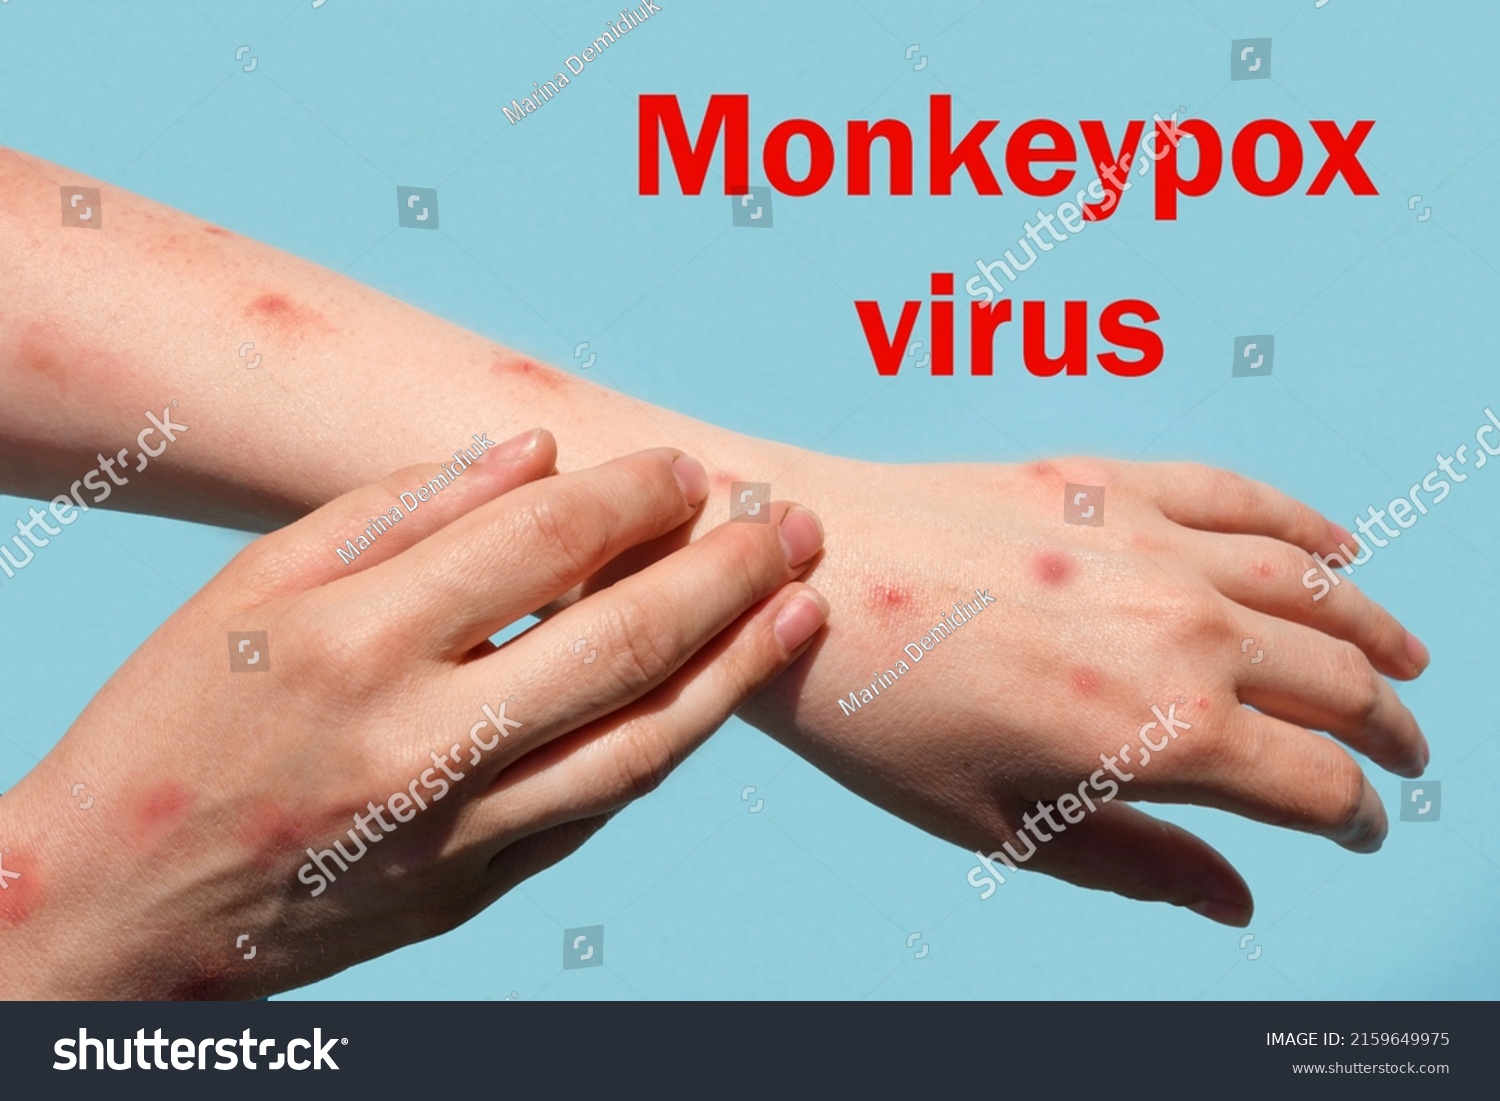 Monkeypox new disease dangerous over the world. Patient with Monkey Pox. Painful rash, red spots blisters on the hand. Close up rash, human hands with Health problem. The word Monkeypox virus. #2159649975